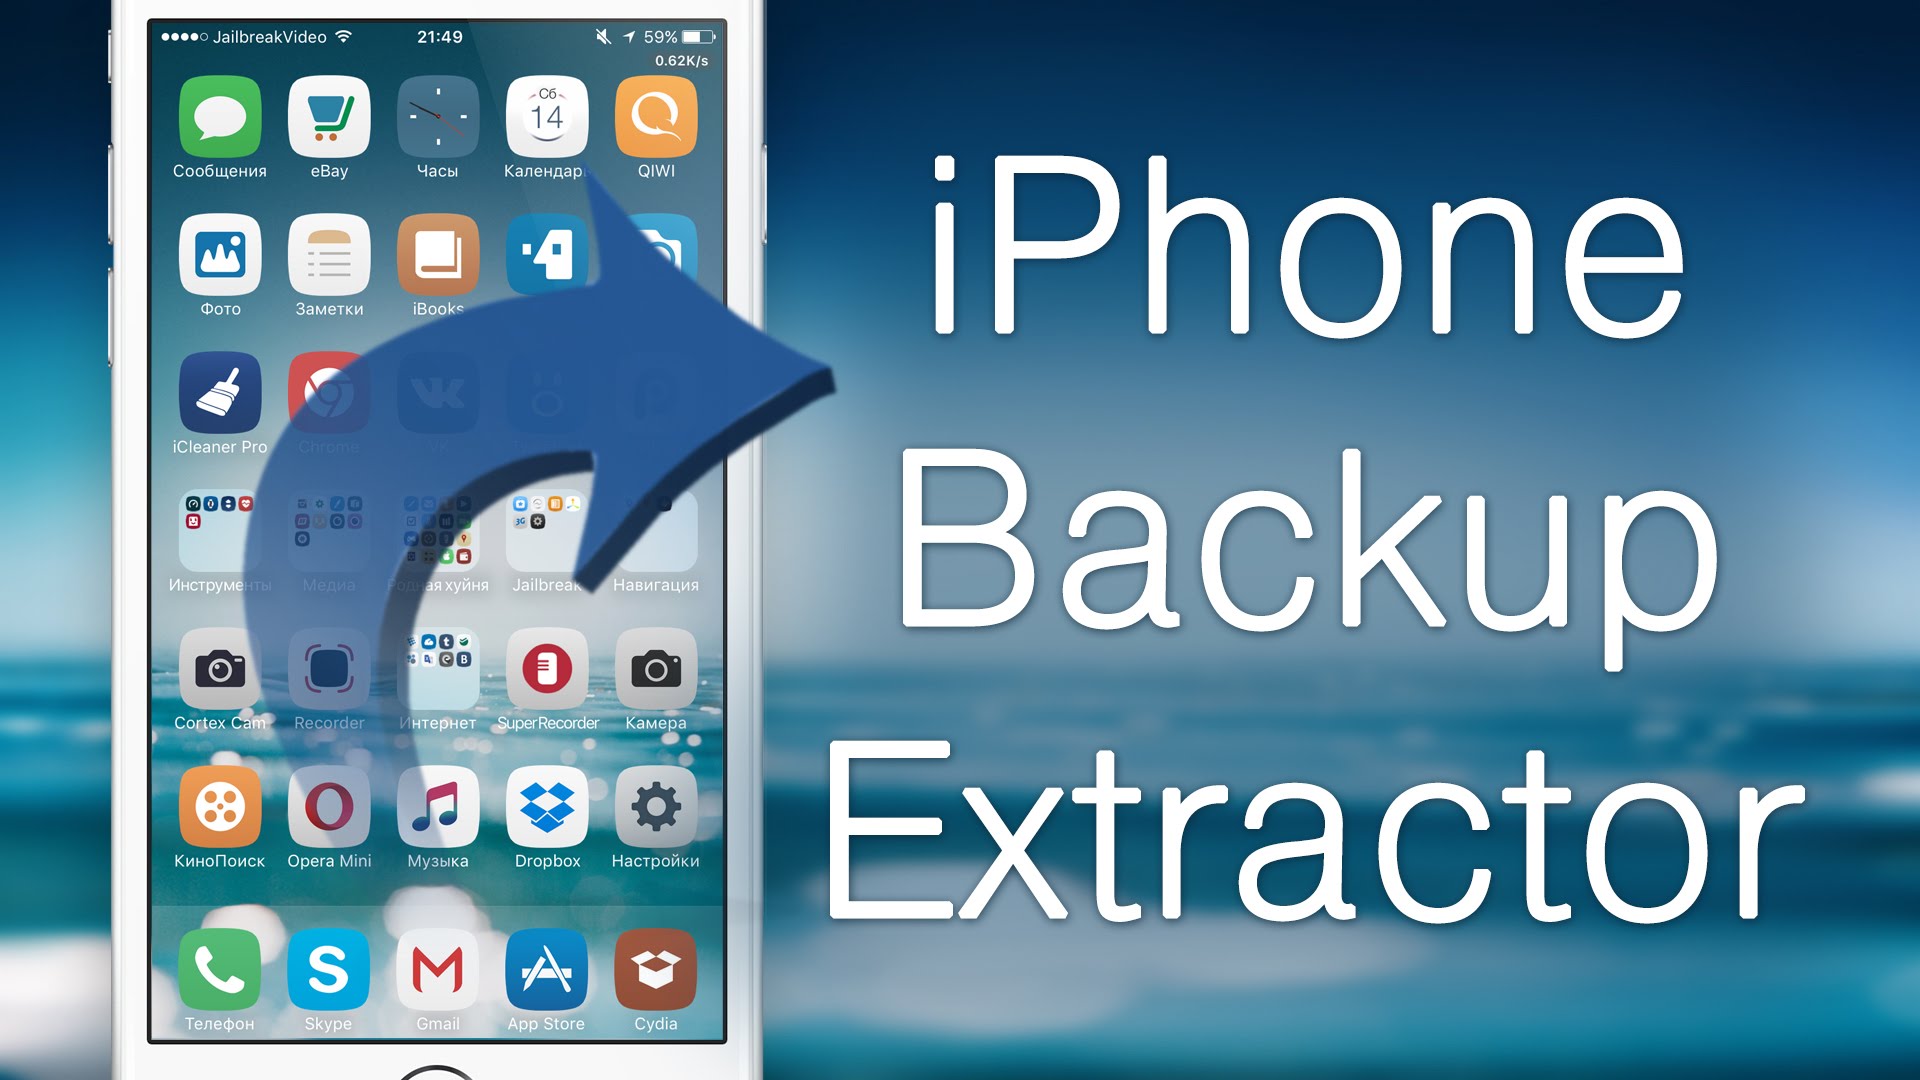 iphone backup extractor activation key